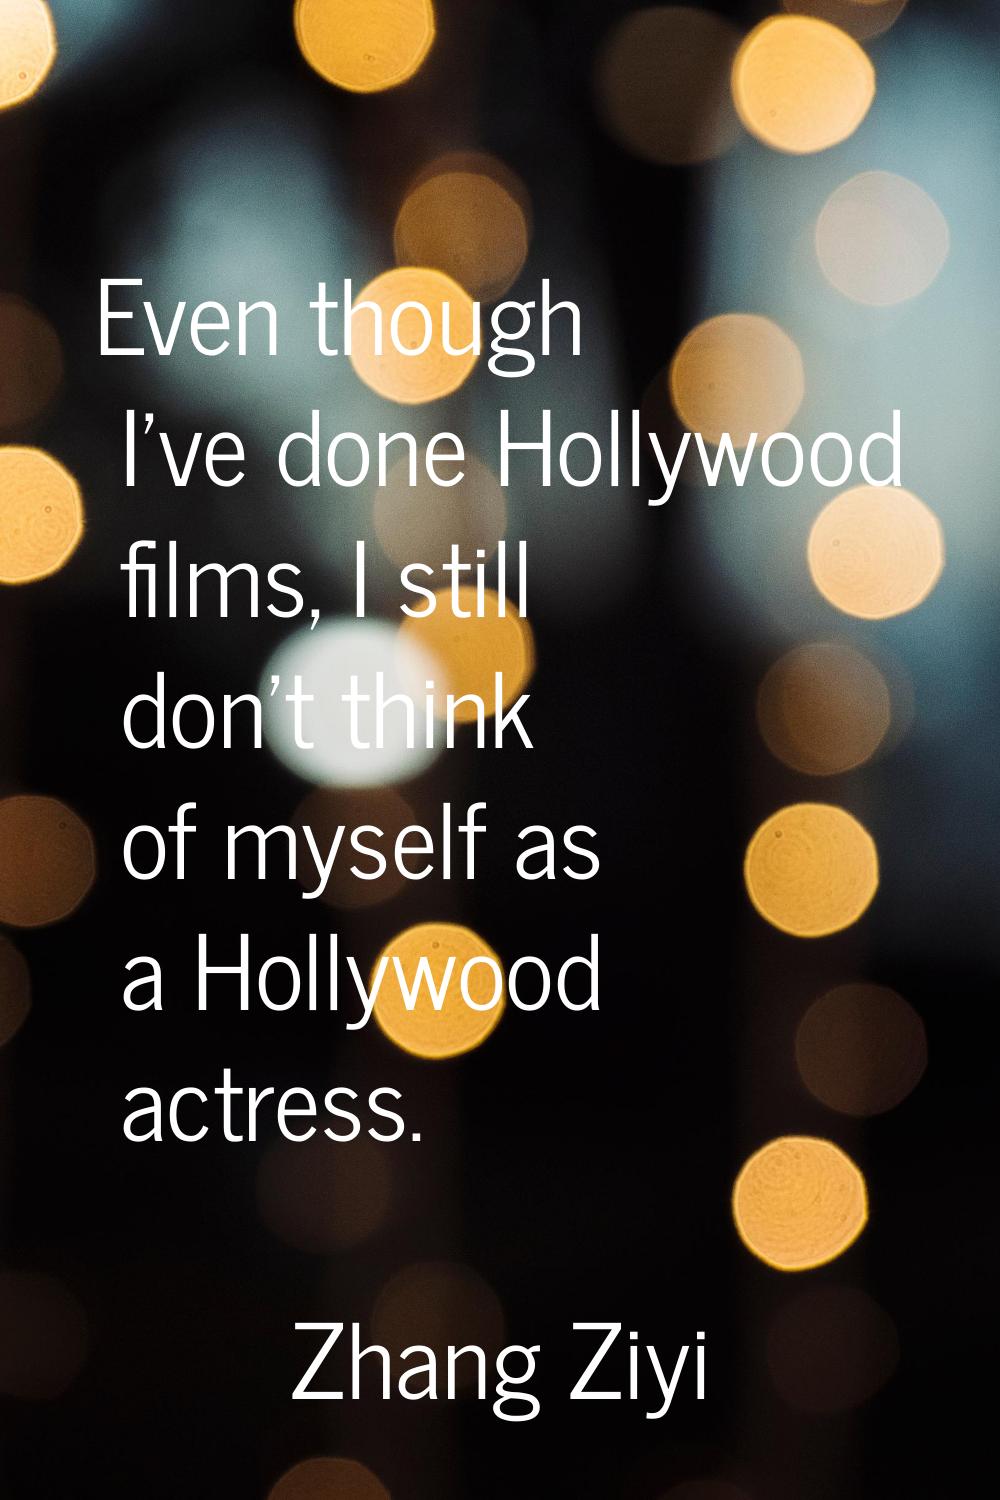 Even though I've done Hollywood films, I still don't think of myself as a Hollywood actress.